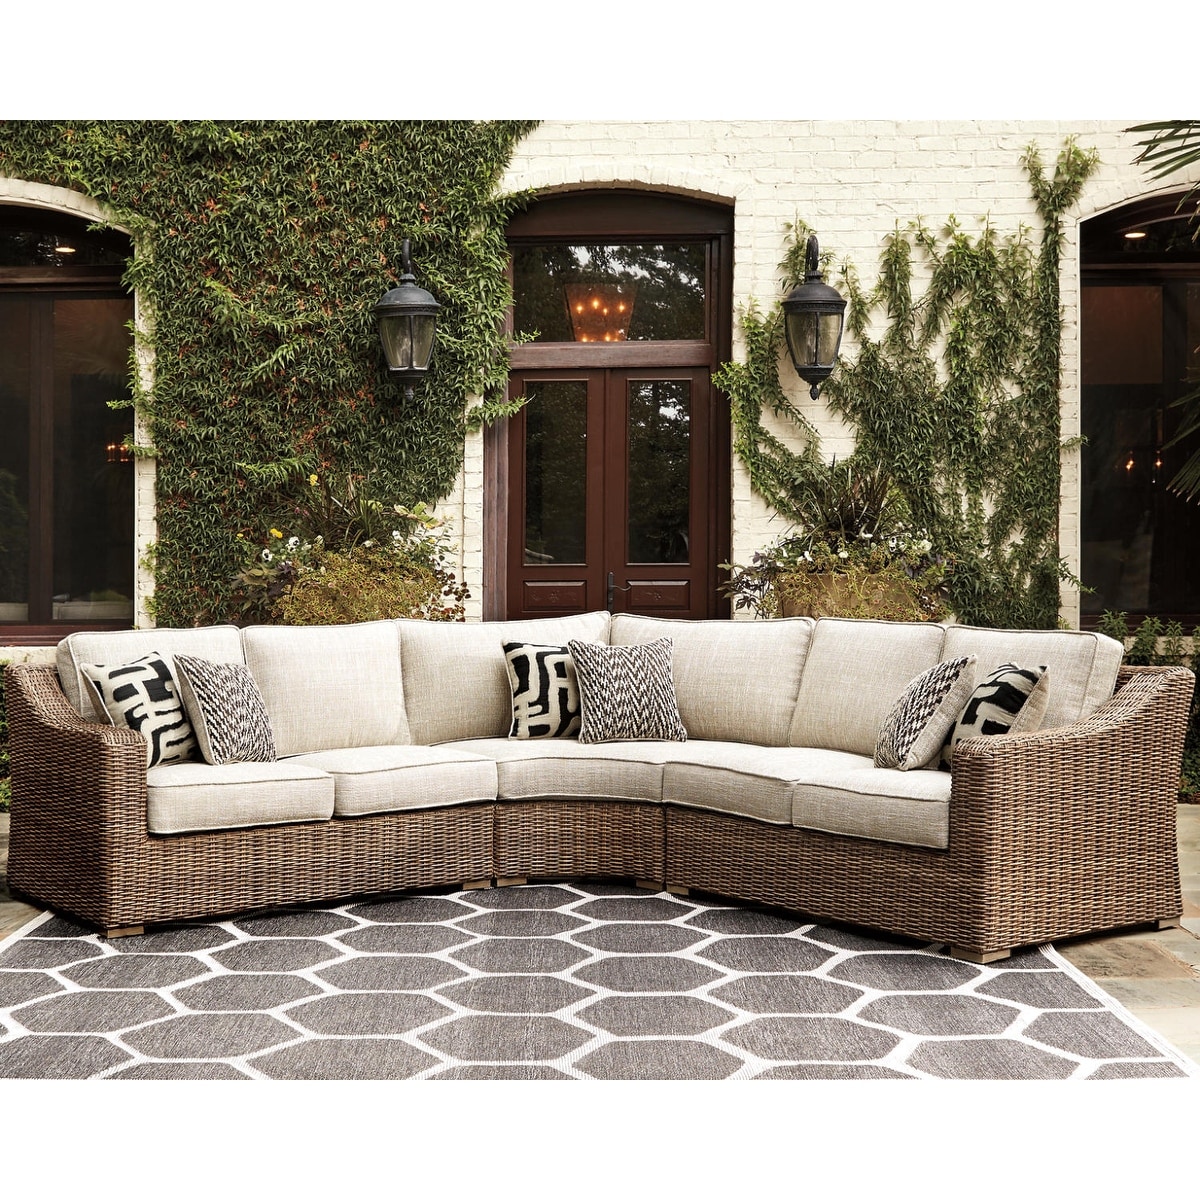 Signature Design by Ashley Beachcroft Sectional Bed & - Beige 26396066 Beyond - Sale Bath On Outdoor 